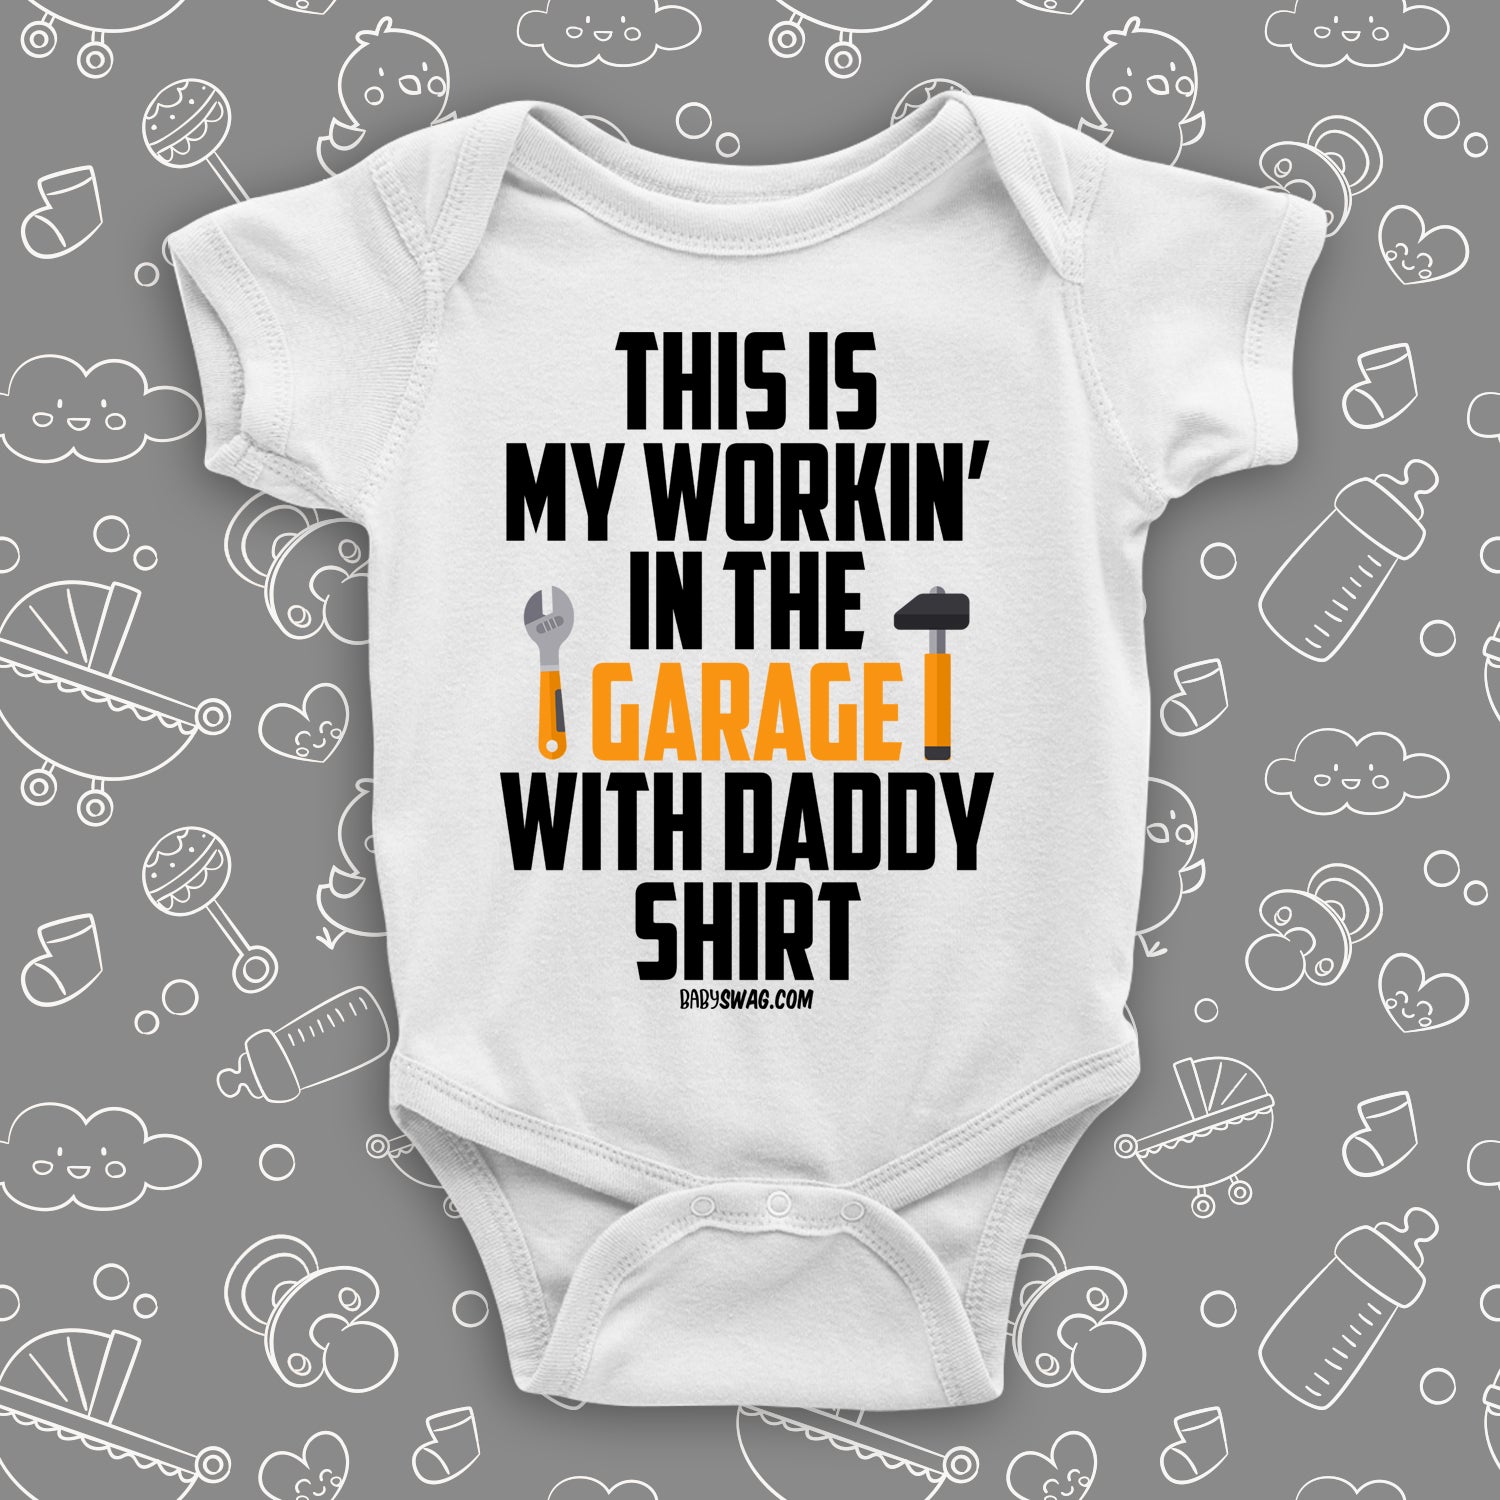 Funny baby boy oneisie saying "This Is My Workin' In The Garage With Daddy Shirt" in white.